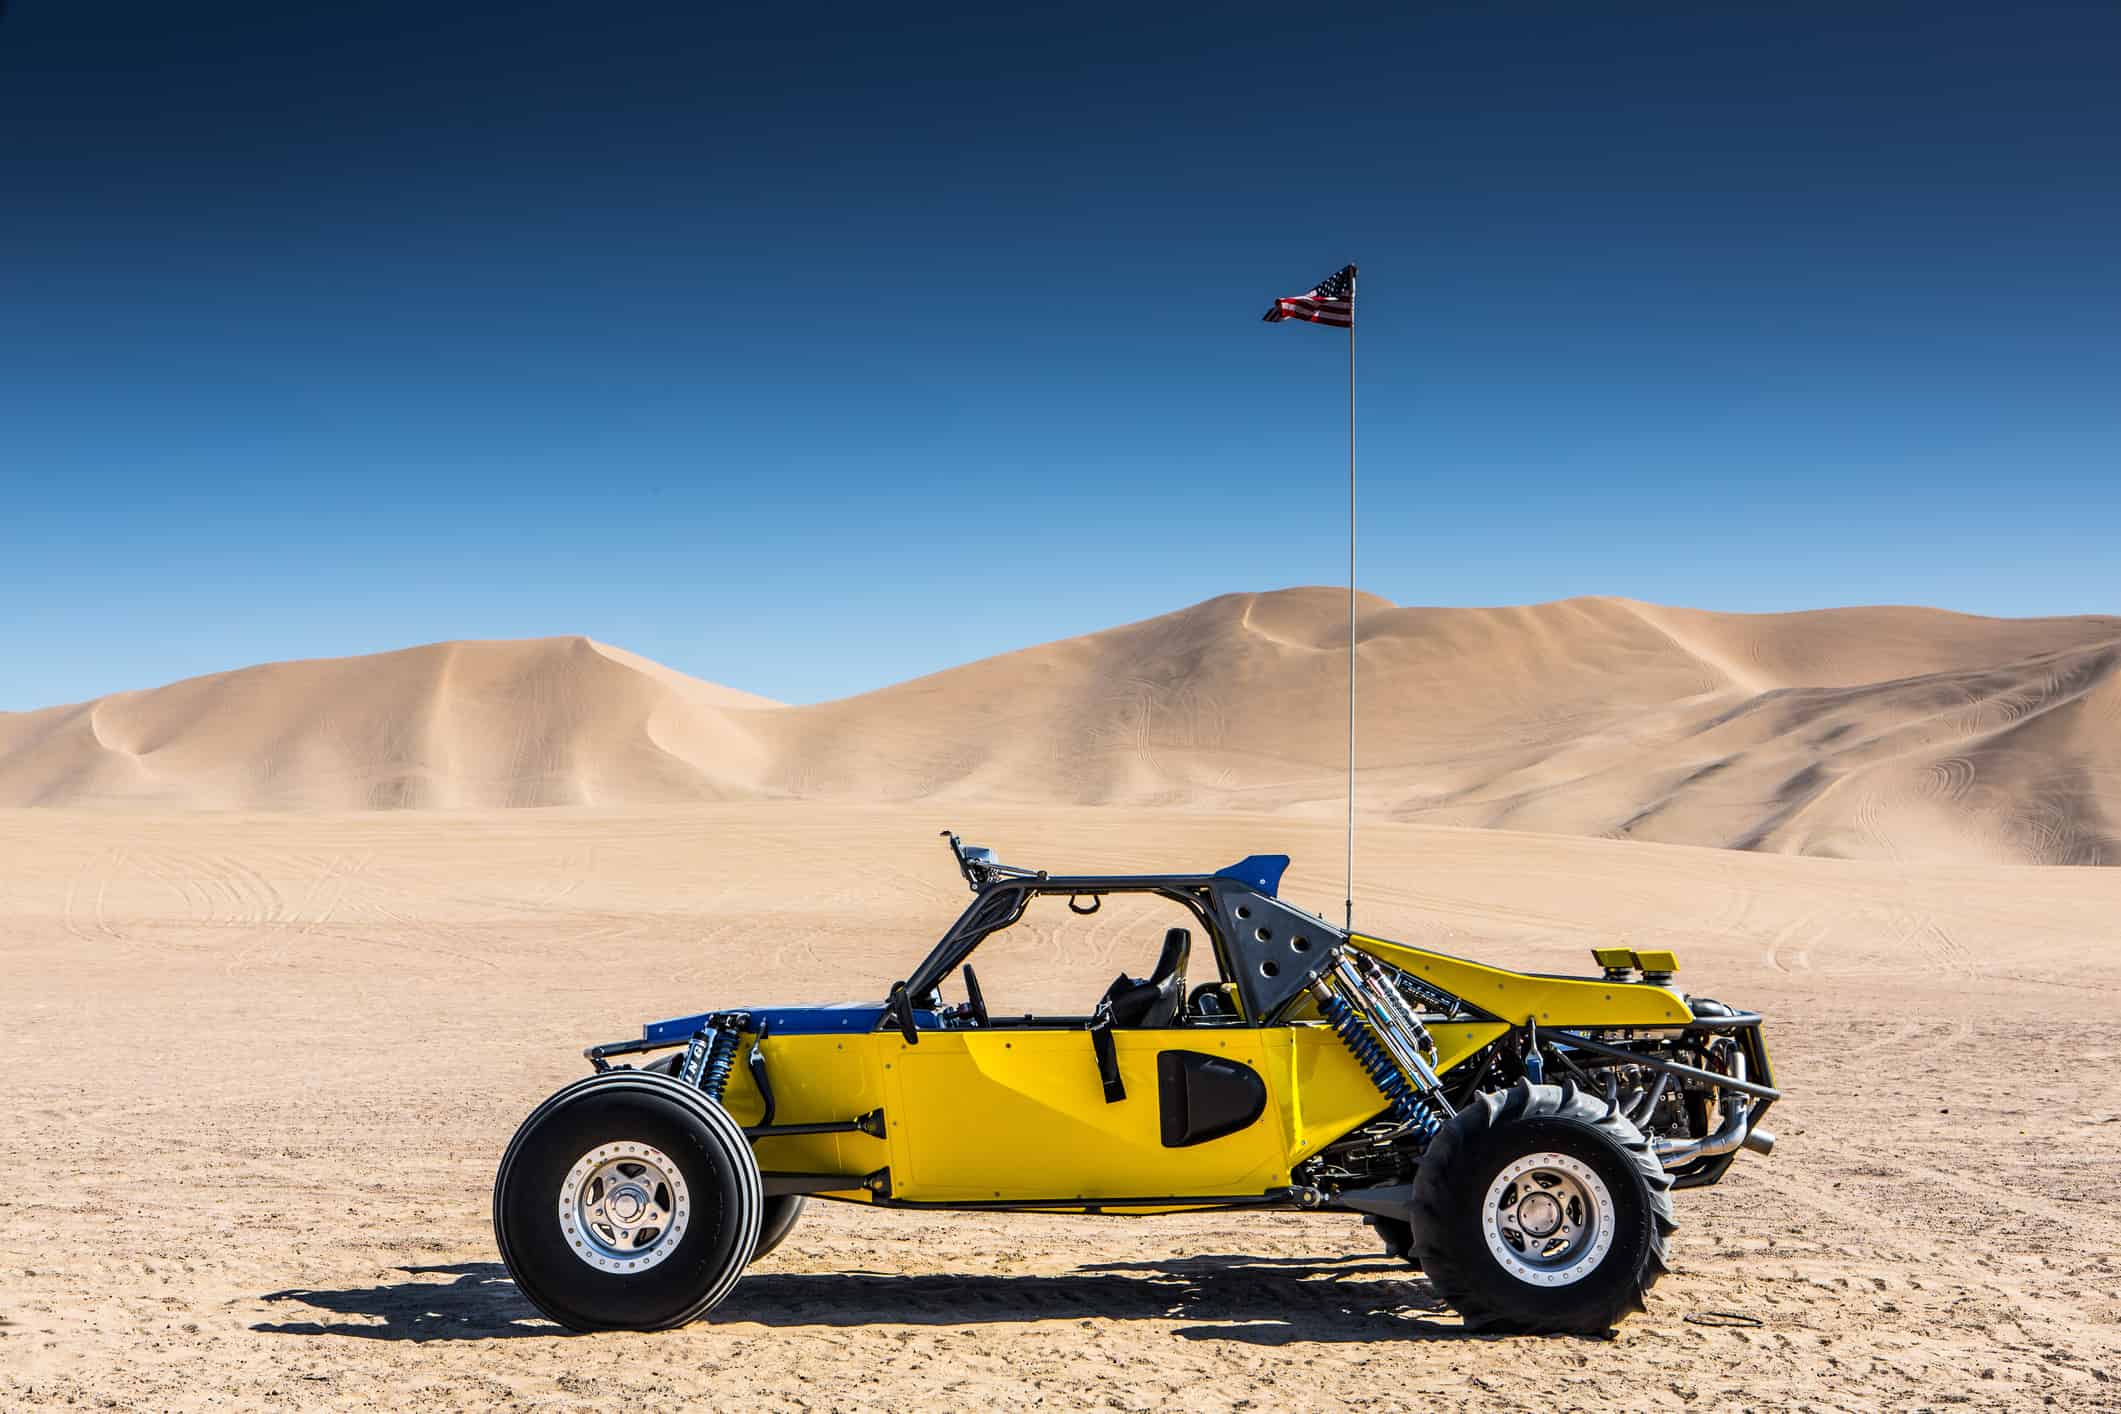 Dune Buggy at the Dunes